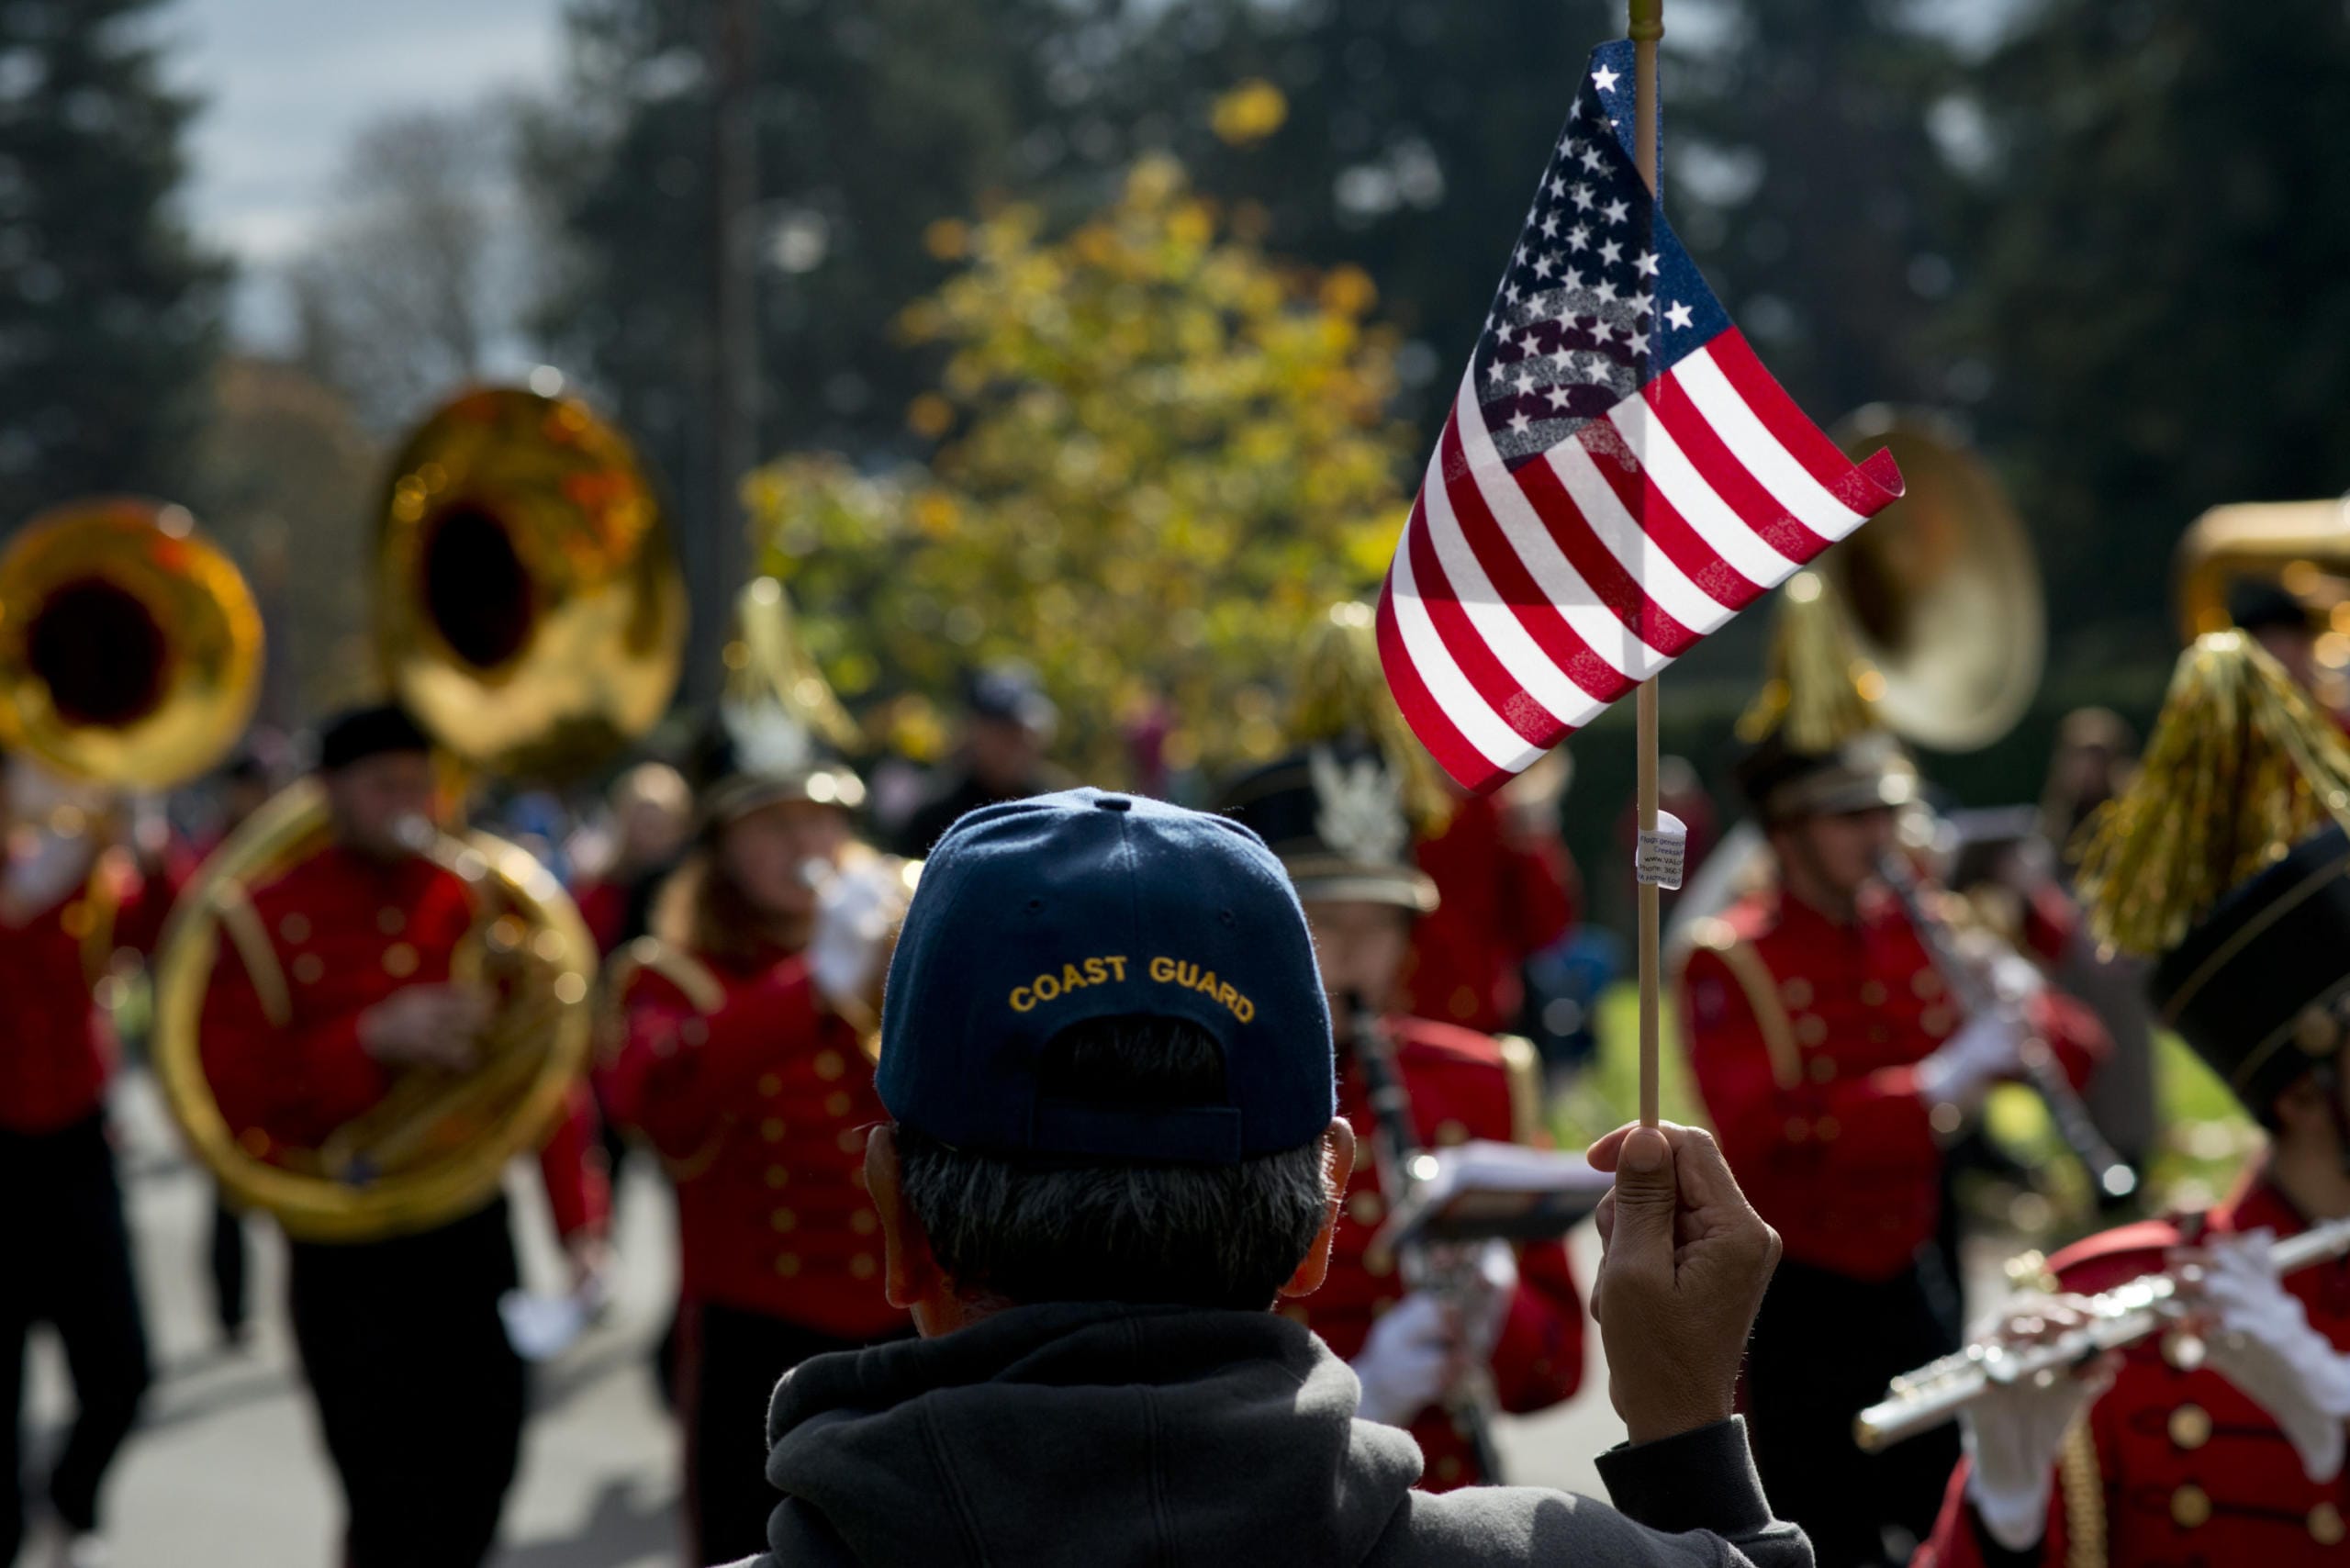 The annual Veterans Day Parade in Vancouver has been canceled.